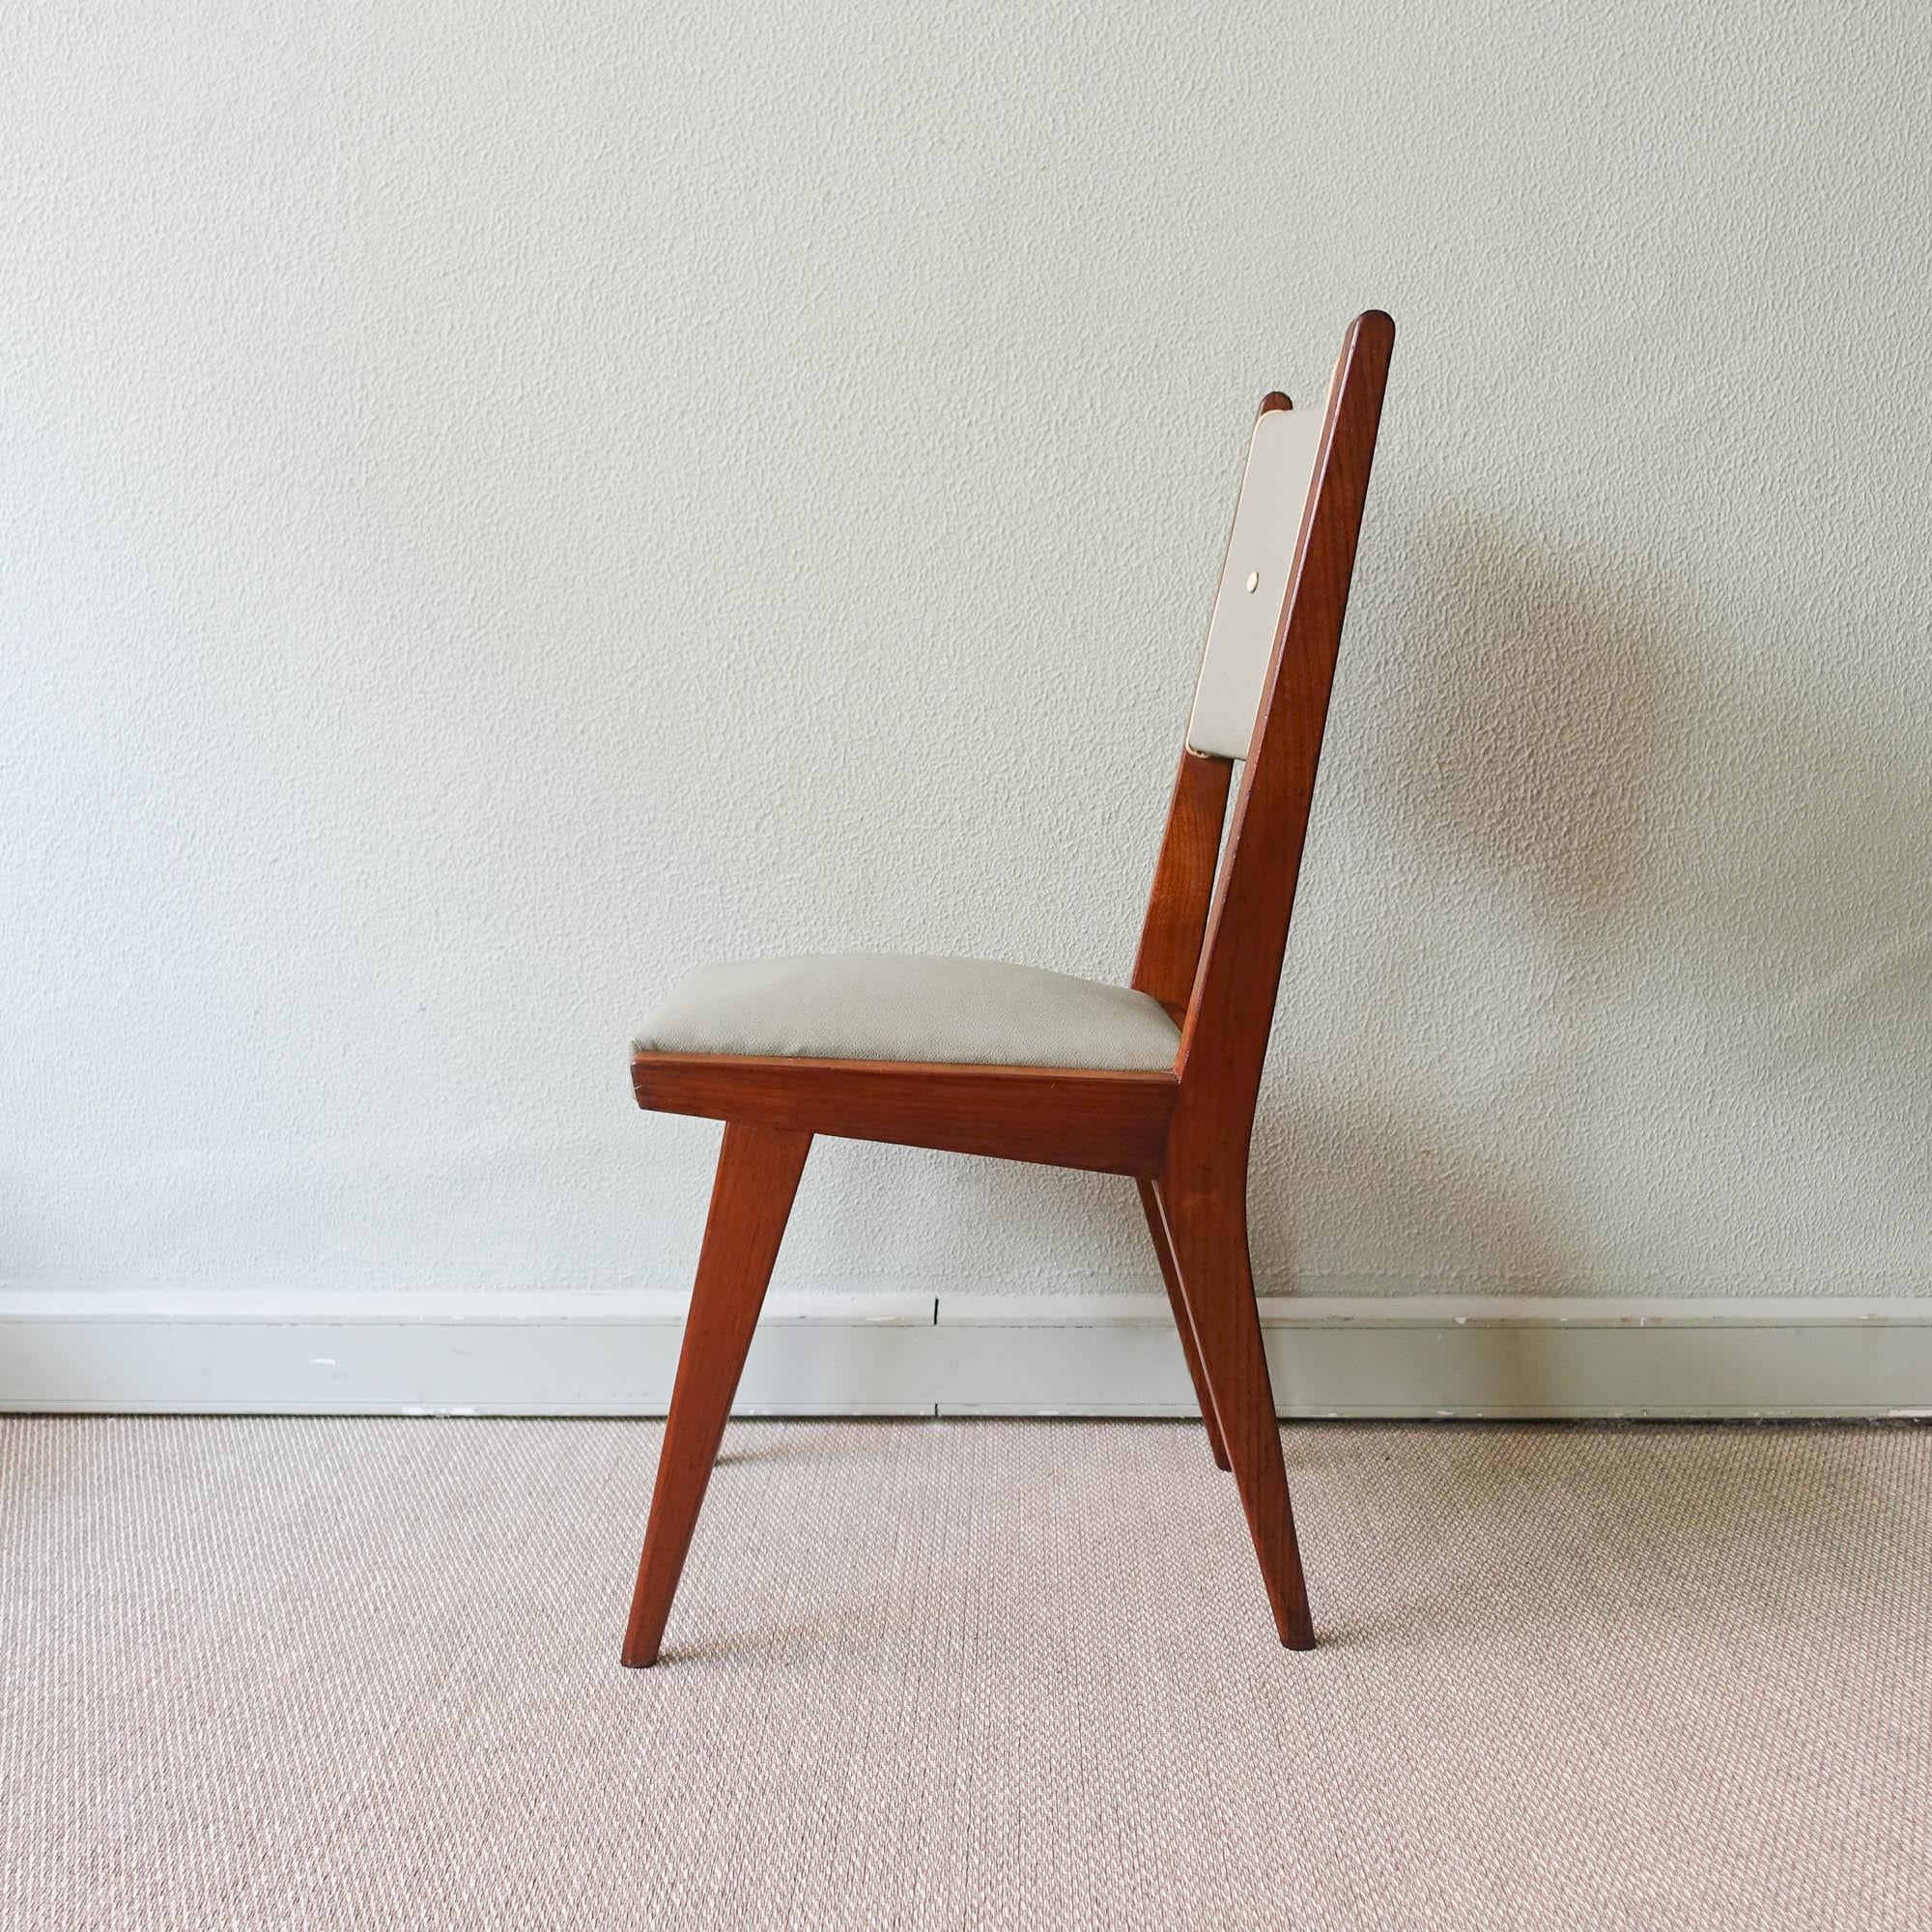 This chair, model 